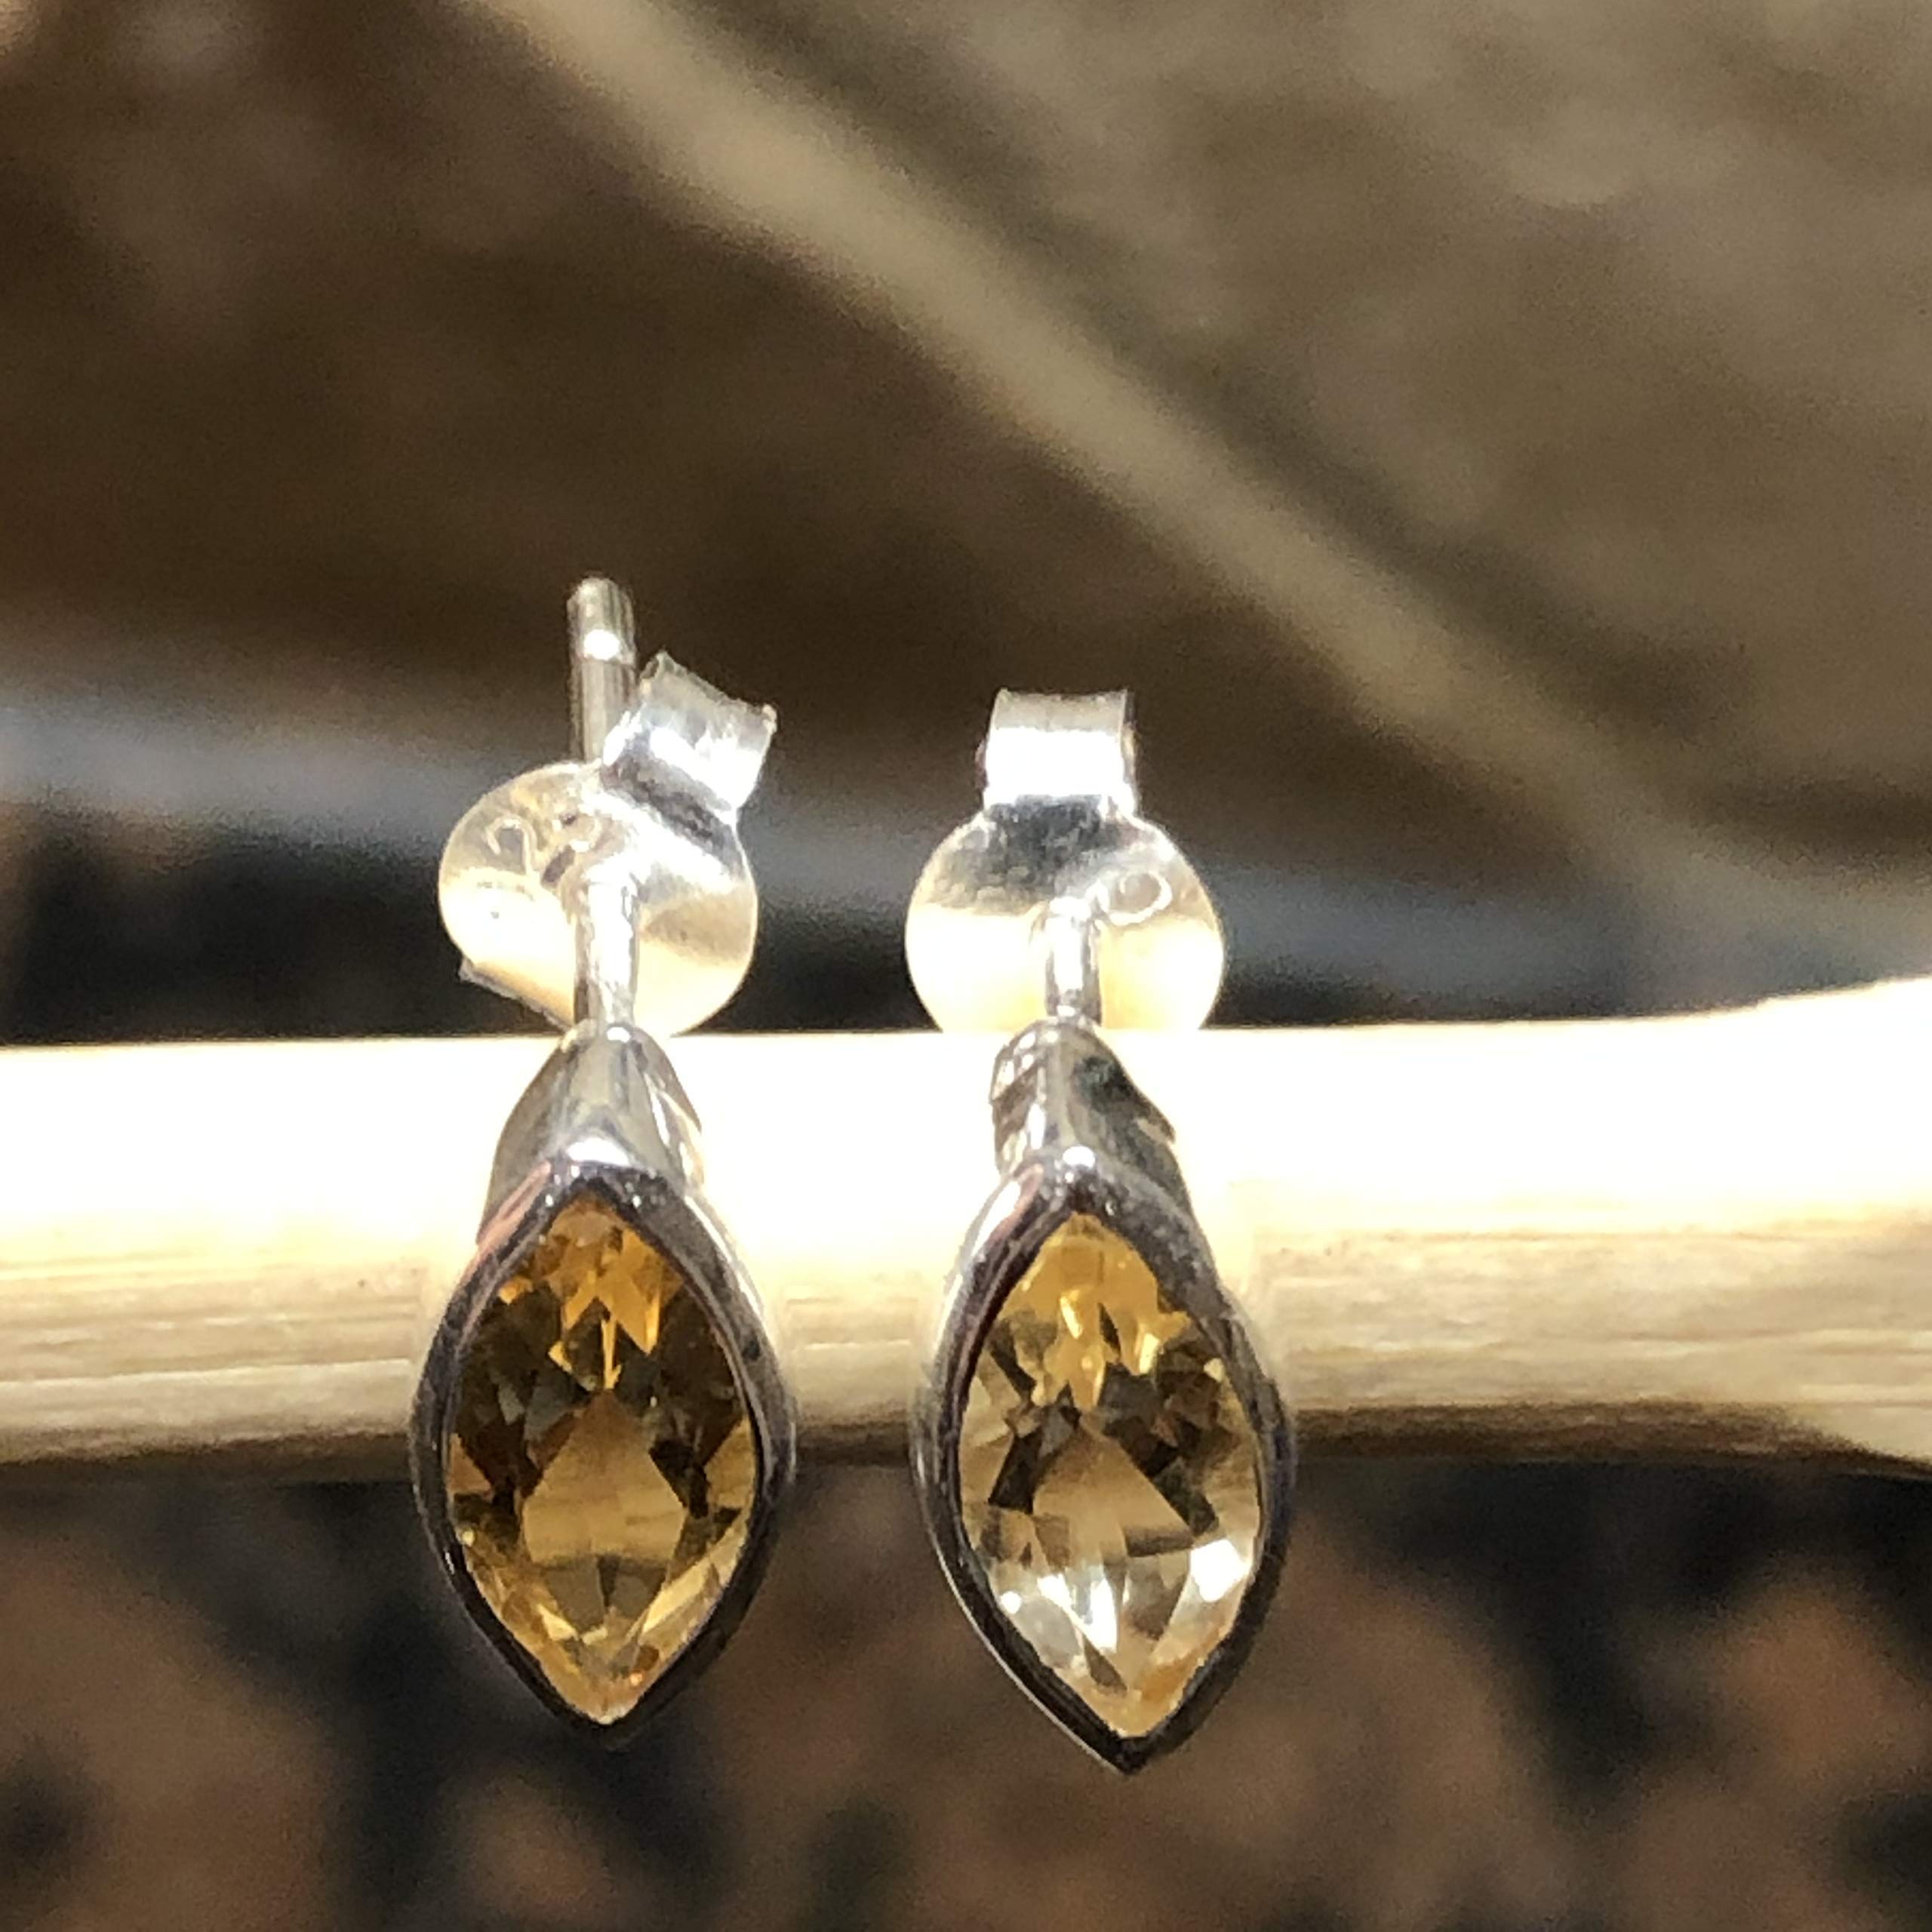 Genuine 2ct Golden Citrine 925 Solid Sterling Silver Earrings 7mm - Natural Rocks by Kala